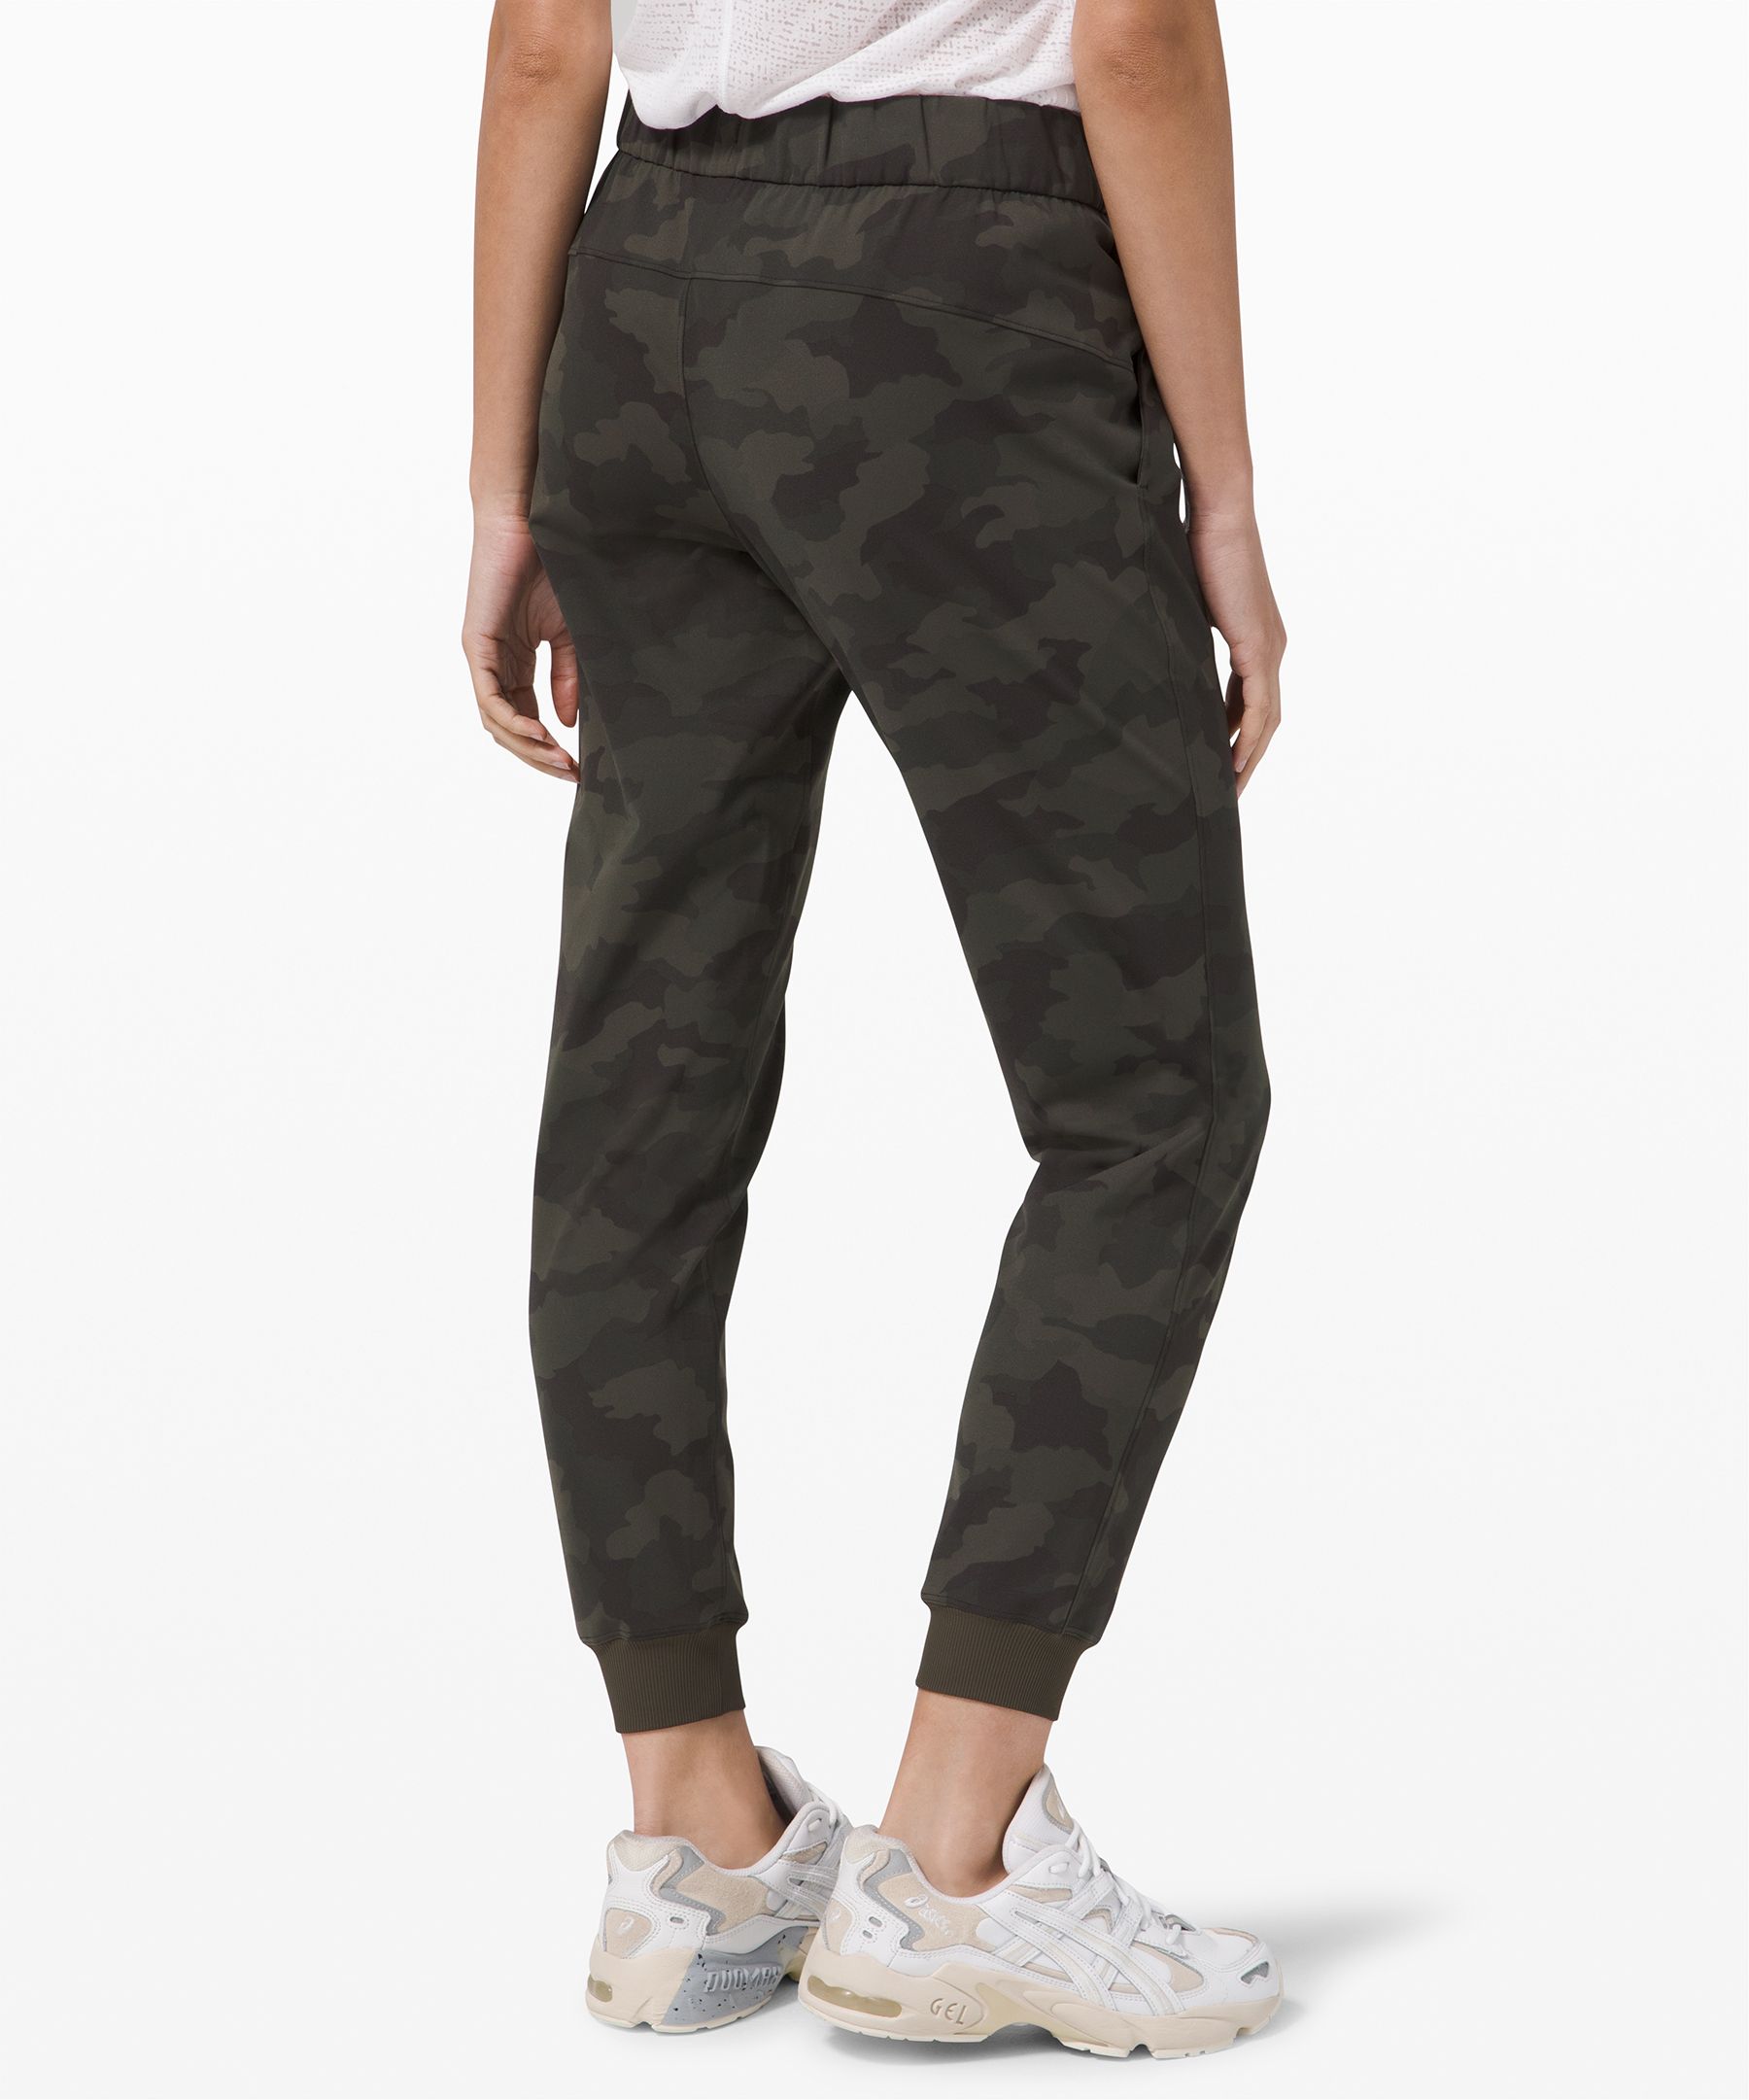 Lululemon On the Fly Jogger 28 *Woven - Like New - clothing & accessories  - by owner - craigslist